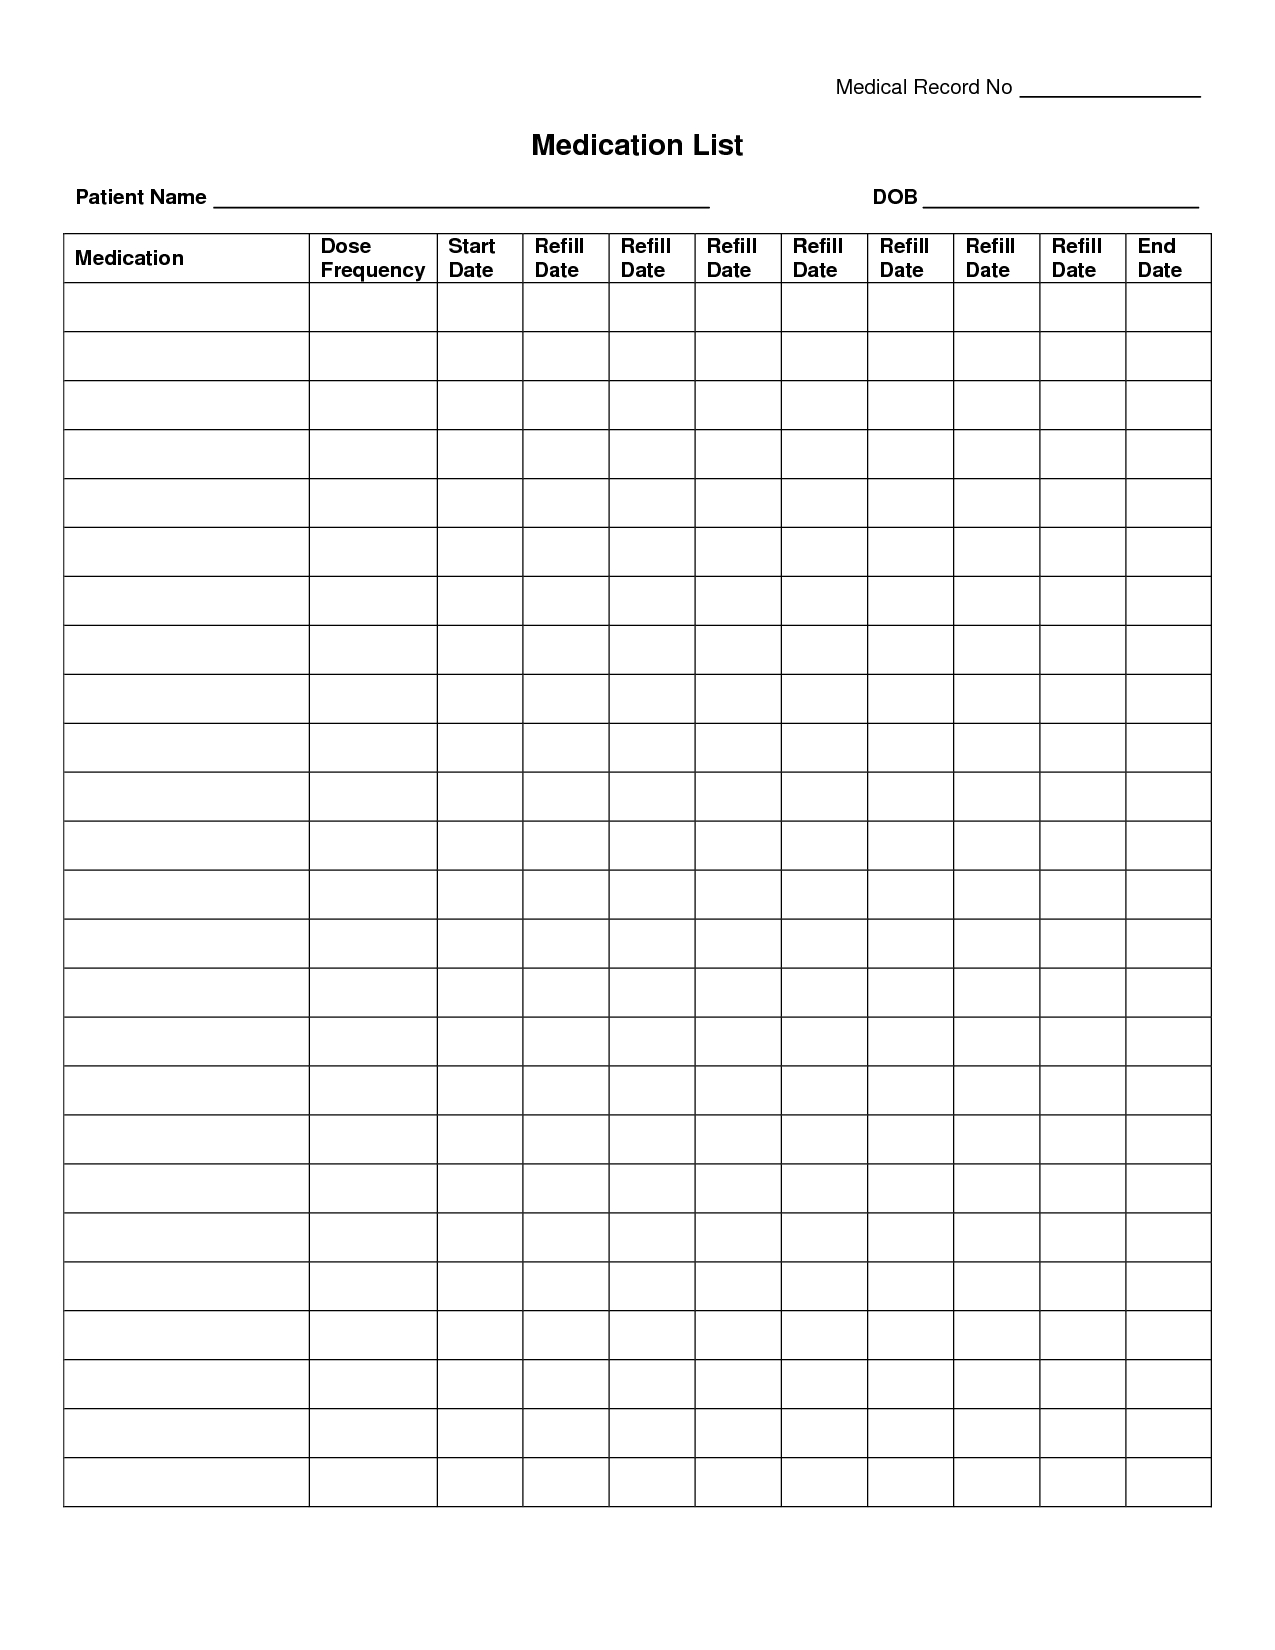 Free Medication Administration Record Template Excel - Yahoo Image - Free Printable Medication List Template